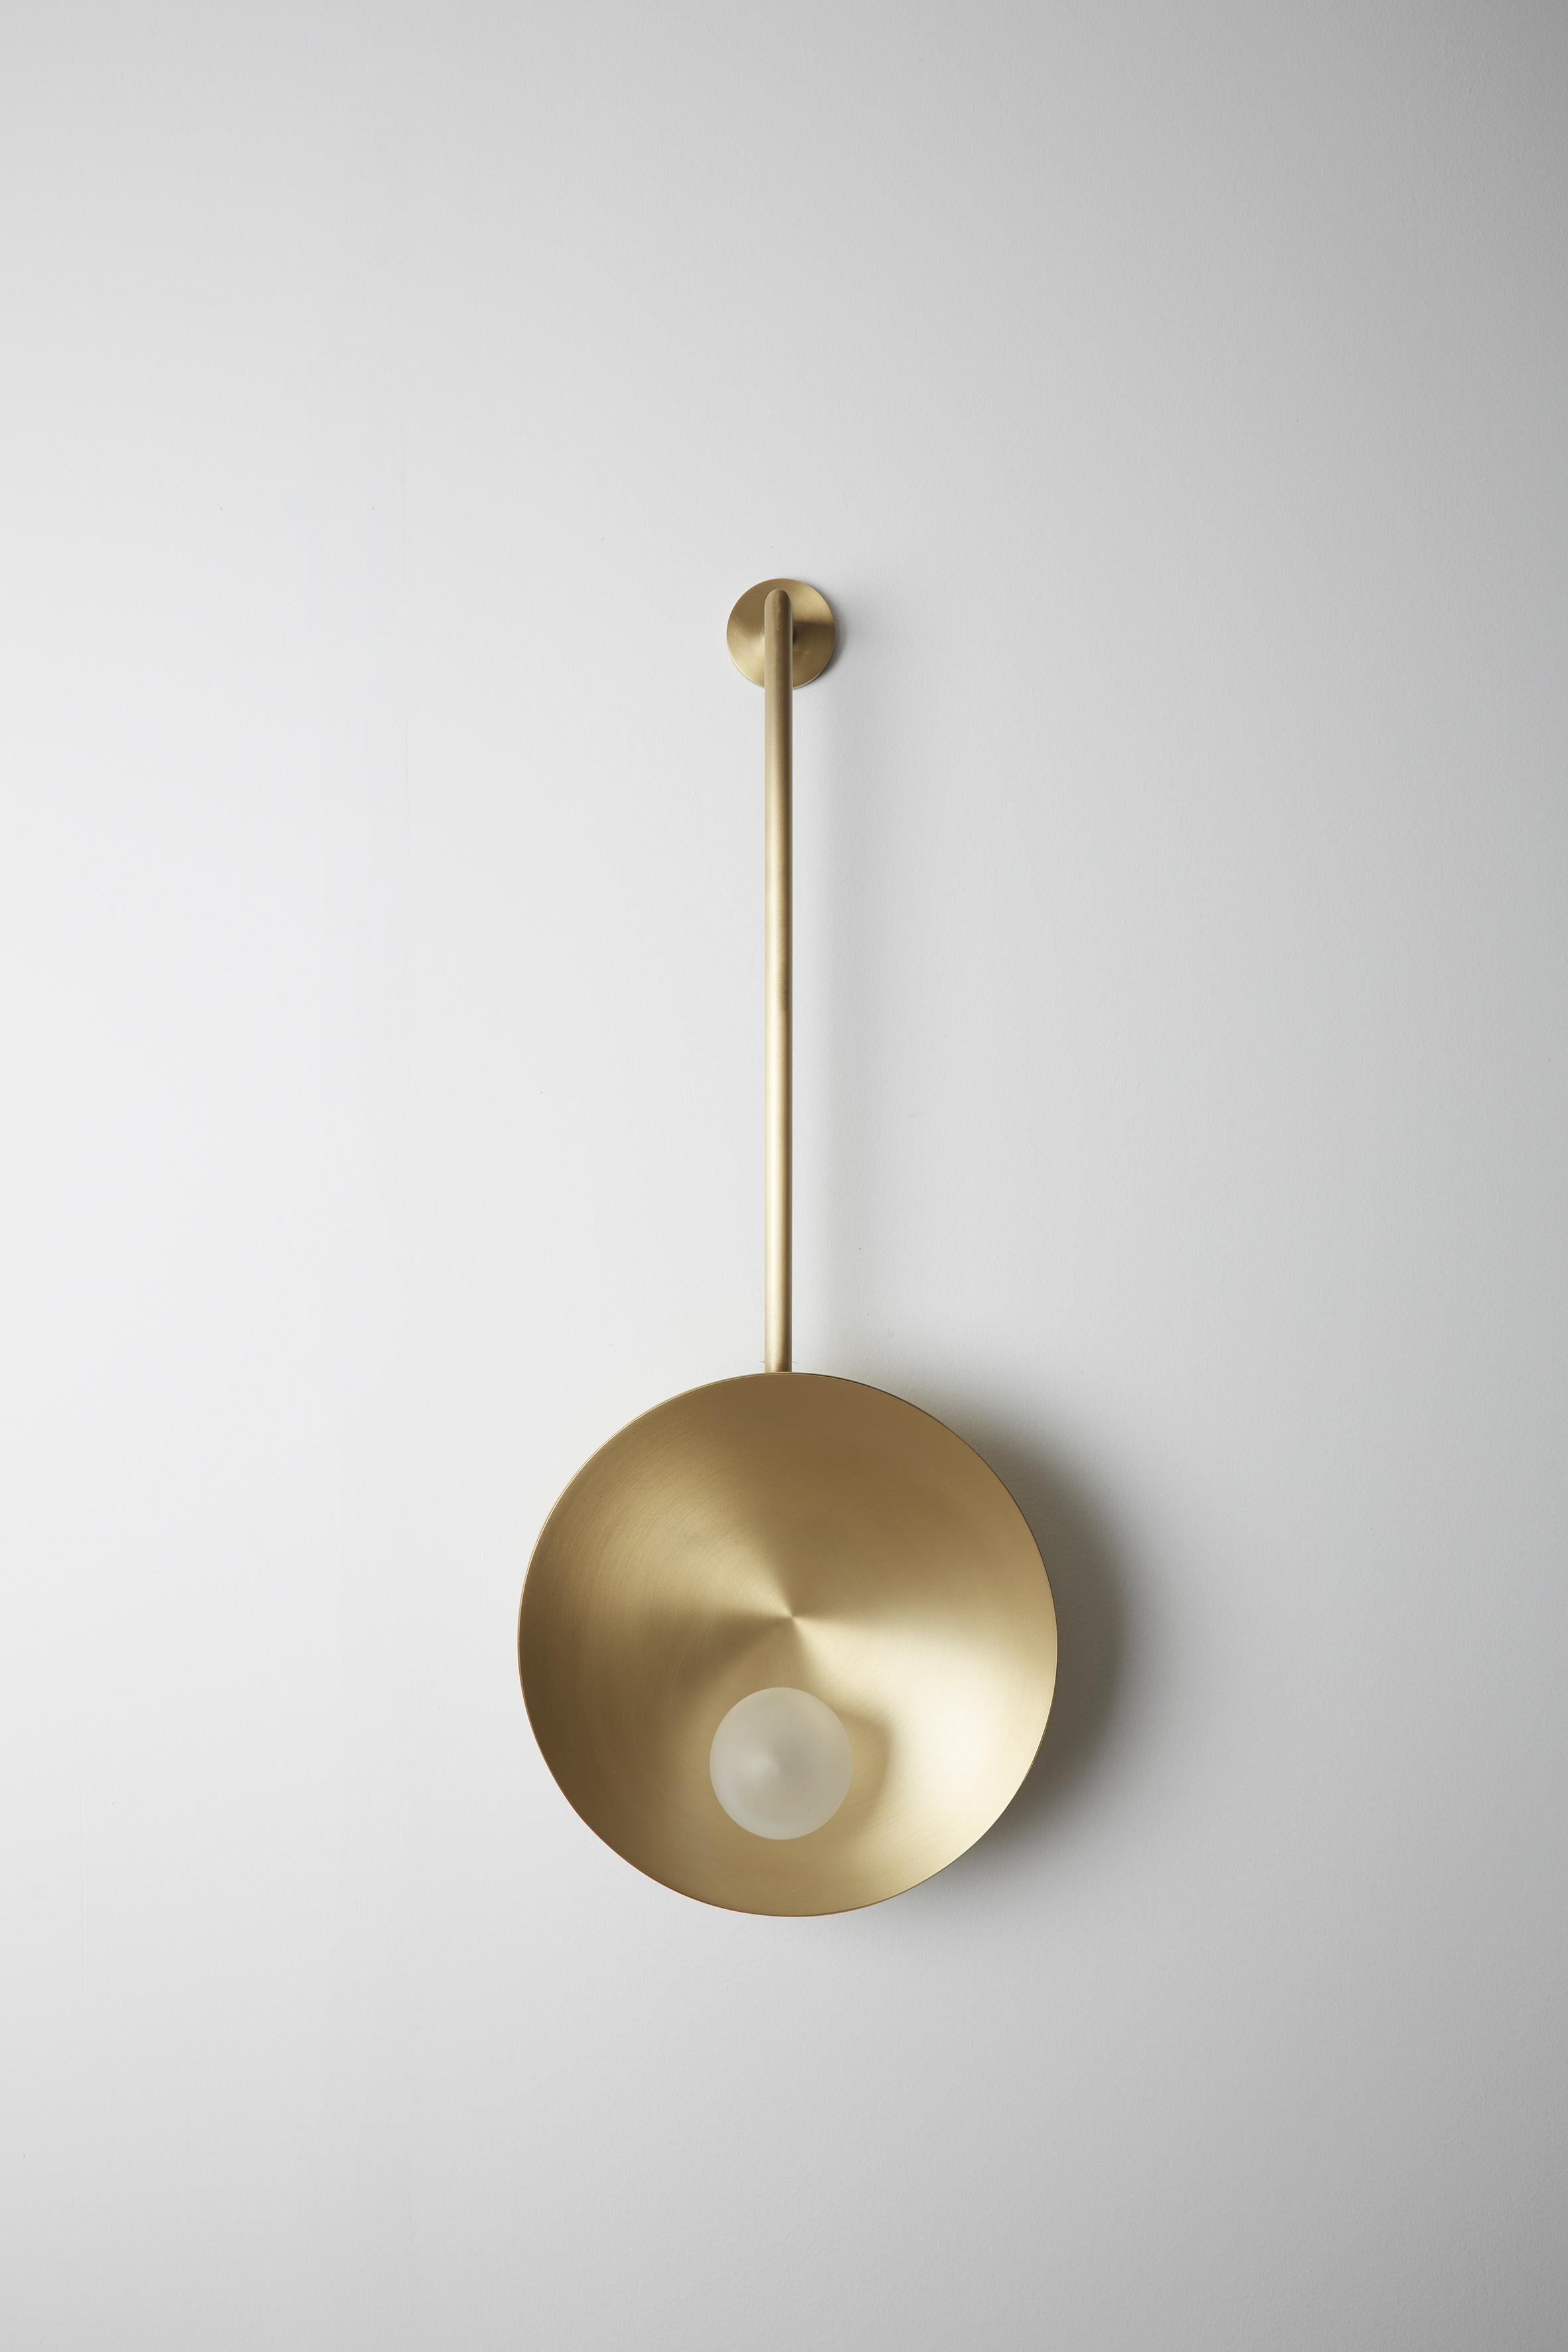 Oyster wall mounted brass, Carla Baz
Dimensions: ø 30 x H 78 x D 14 cm
Weight: 2 kg
Material: Brass, blown satin glass globes

Oyster is a series of sculptural lighting pieces that were developed in 2016. Wanting to explore the idea of customization